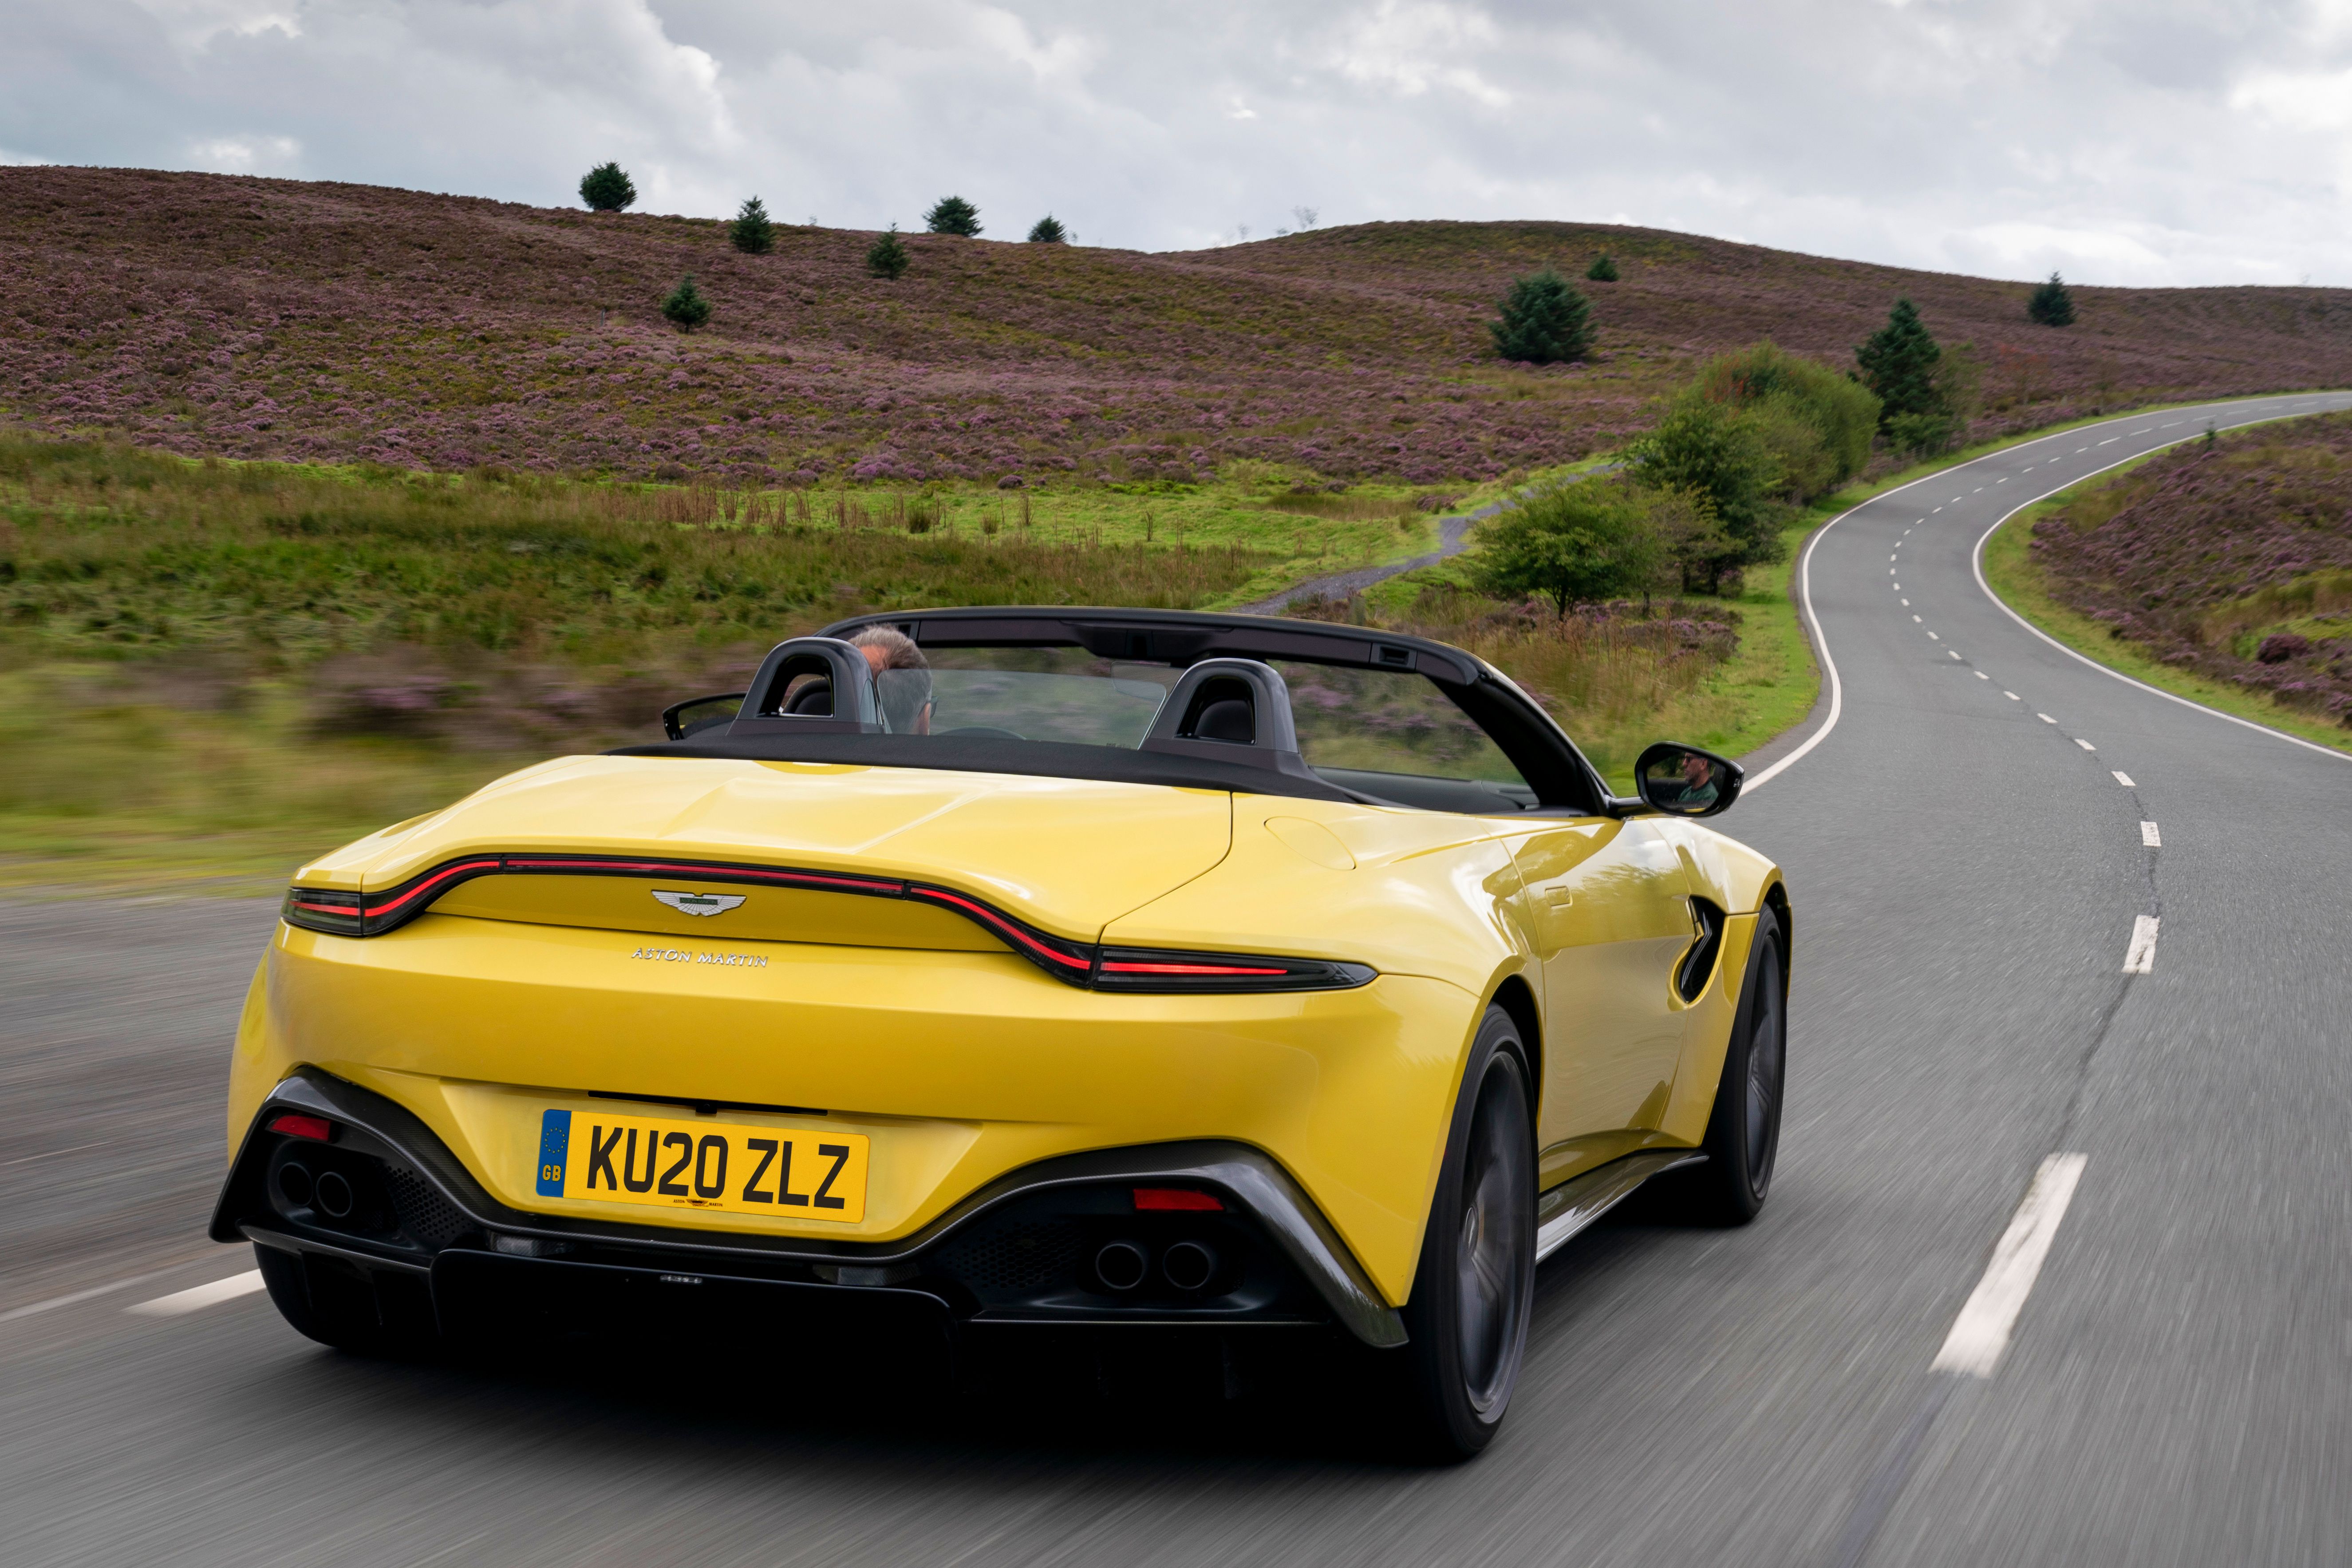 The rear of a Yellow Tang Vantage Roadster